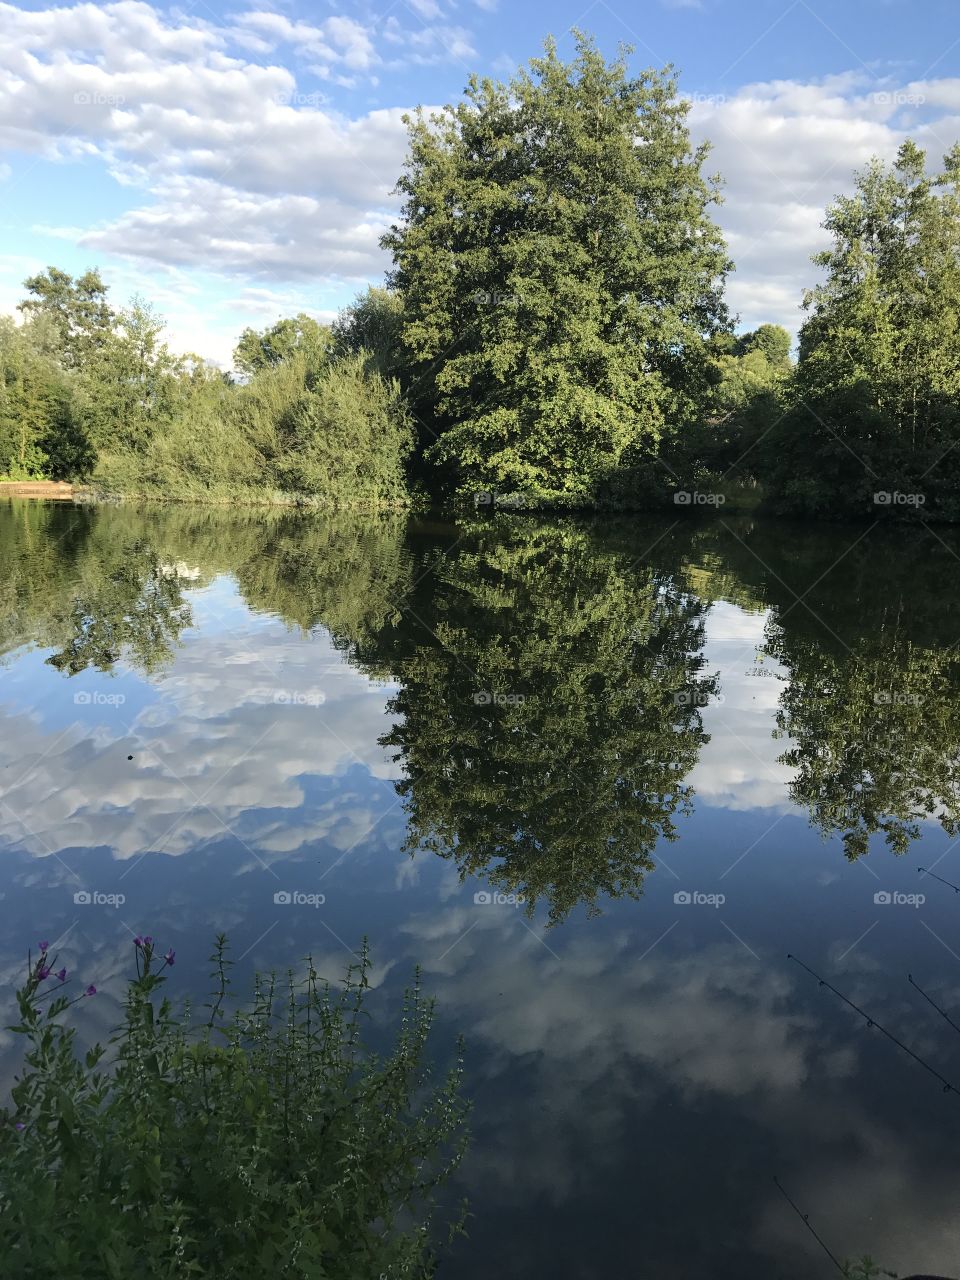 Reflection on the lake